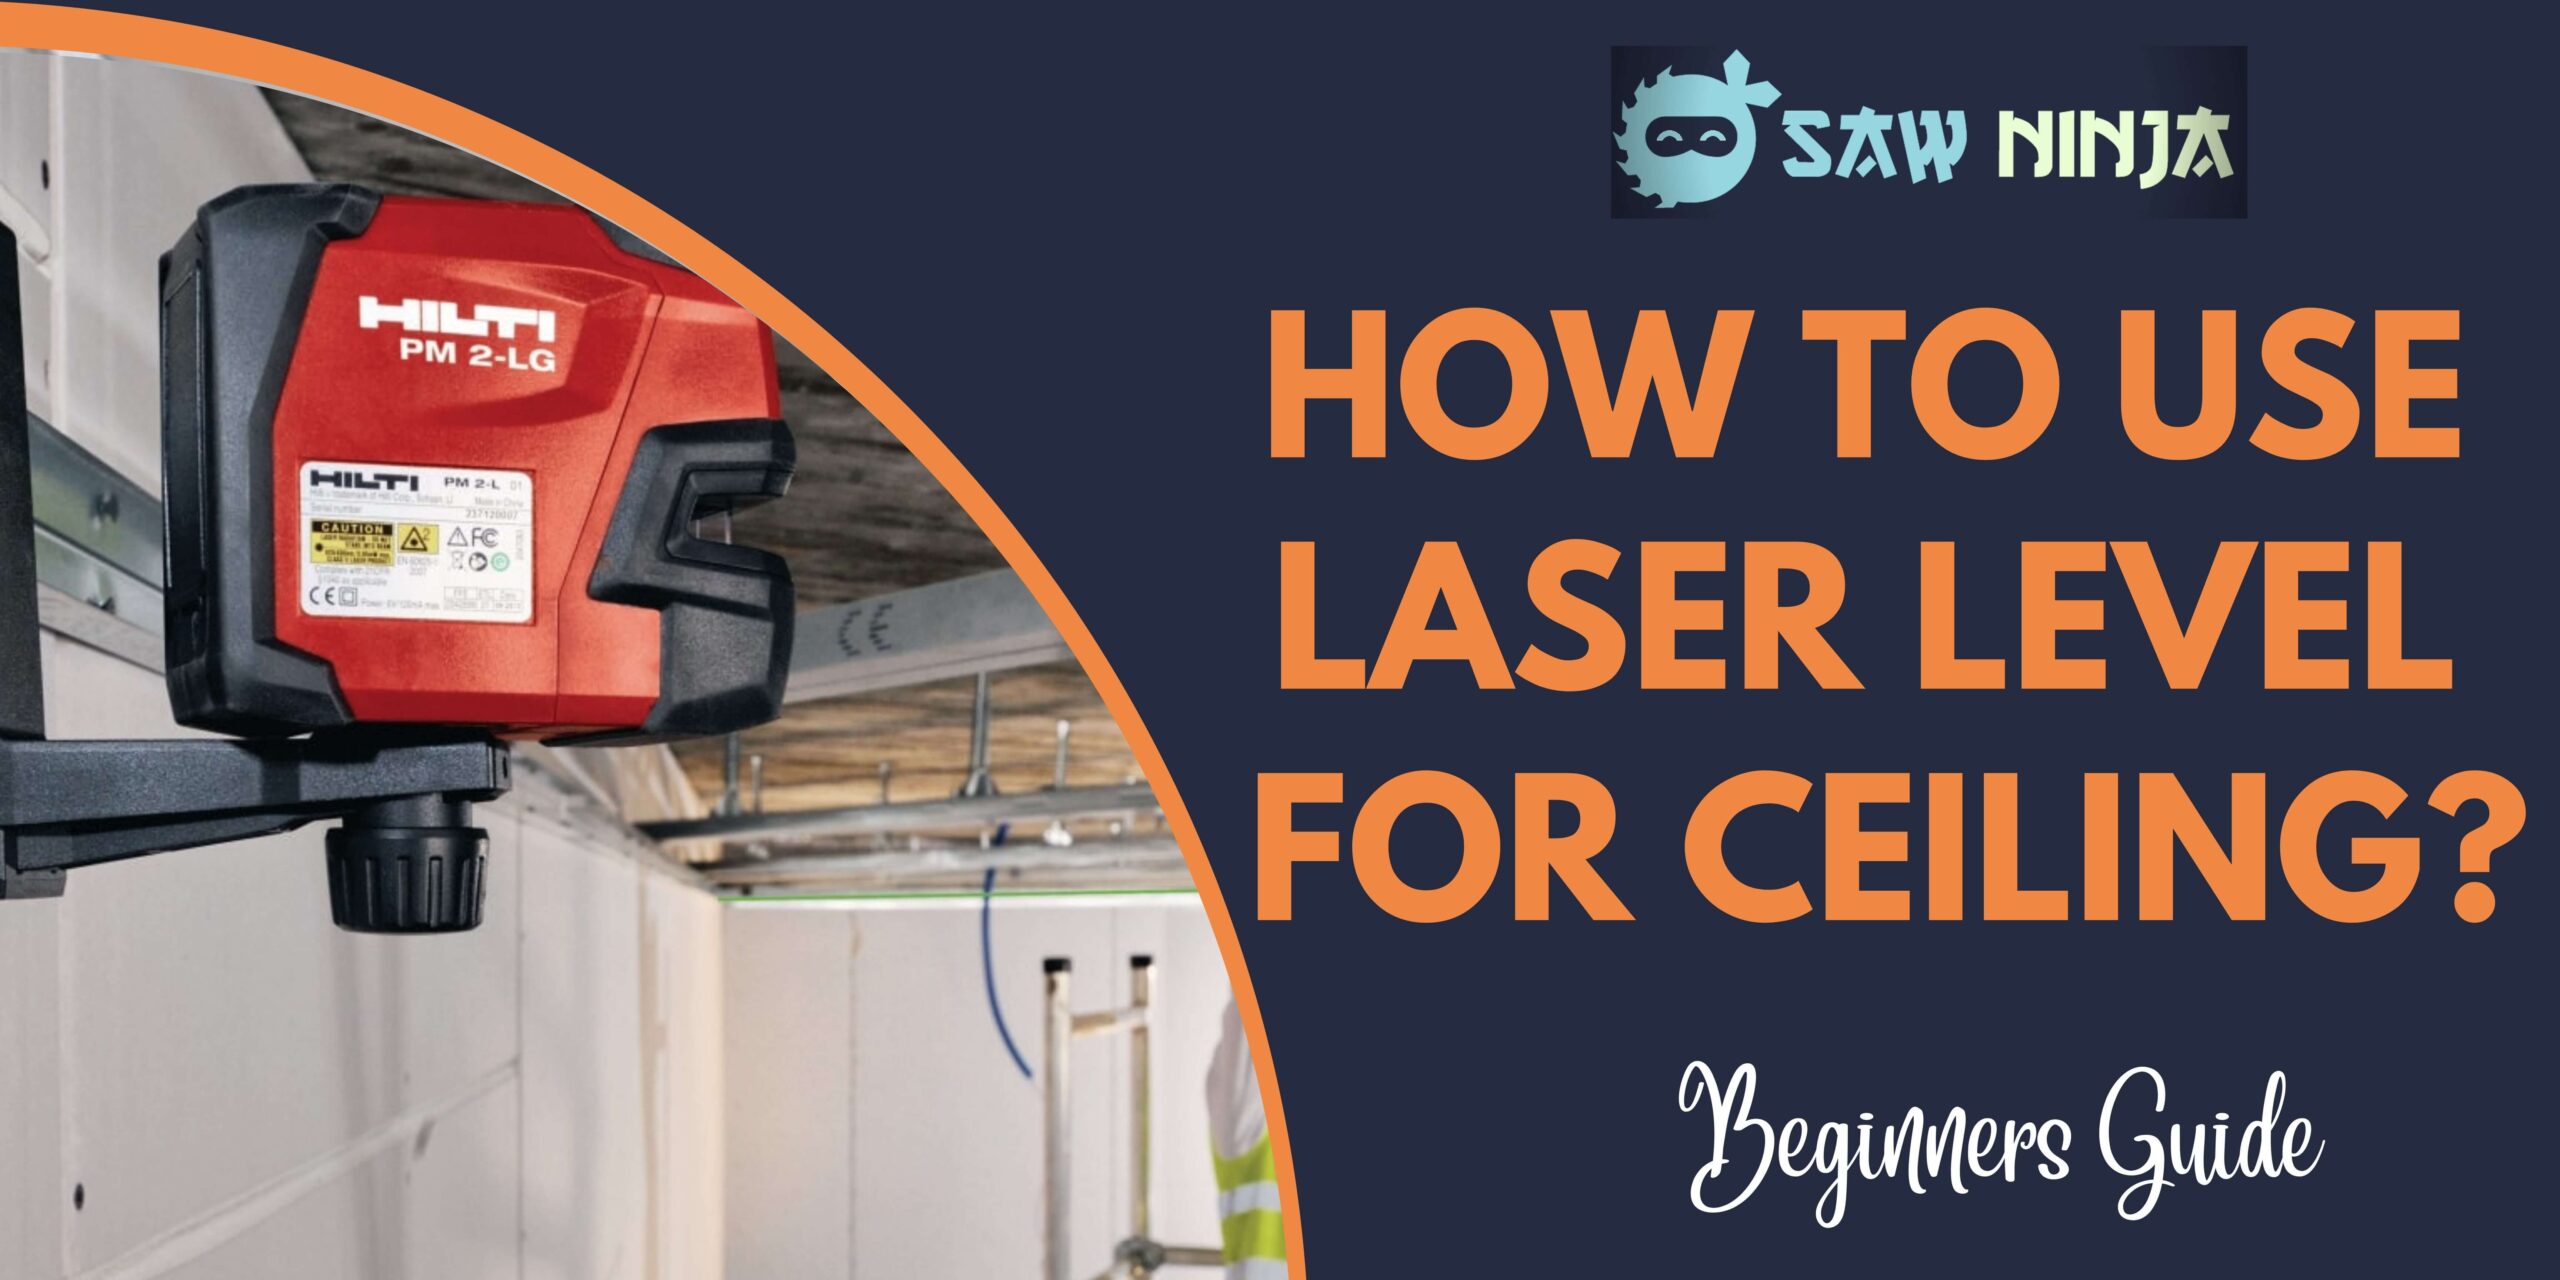 How to Use Laser Level for Ceiling